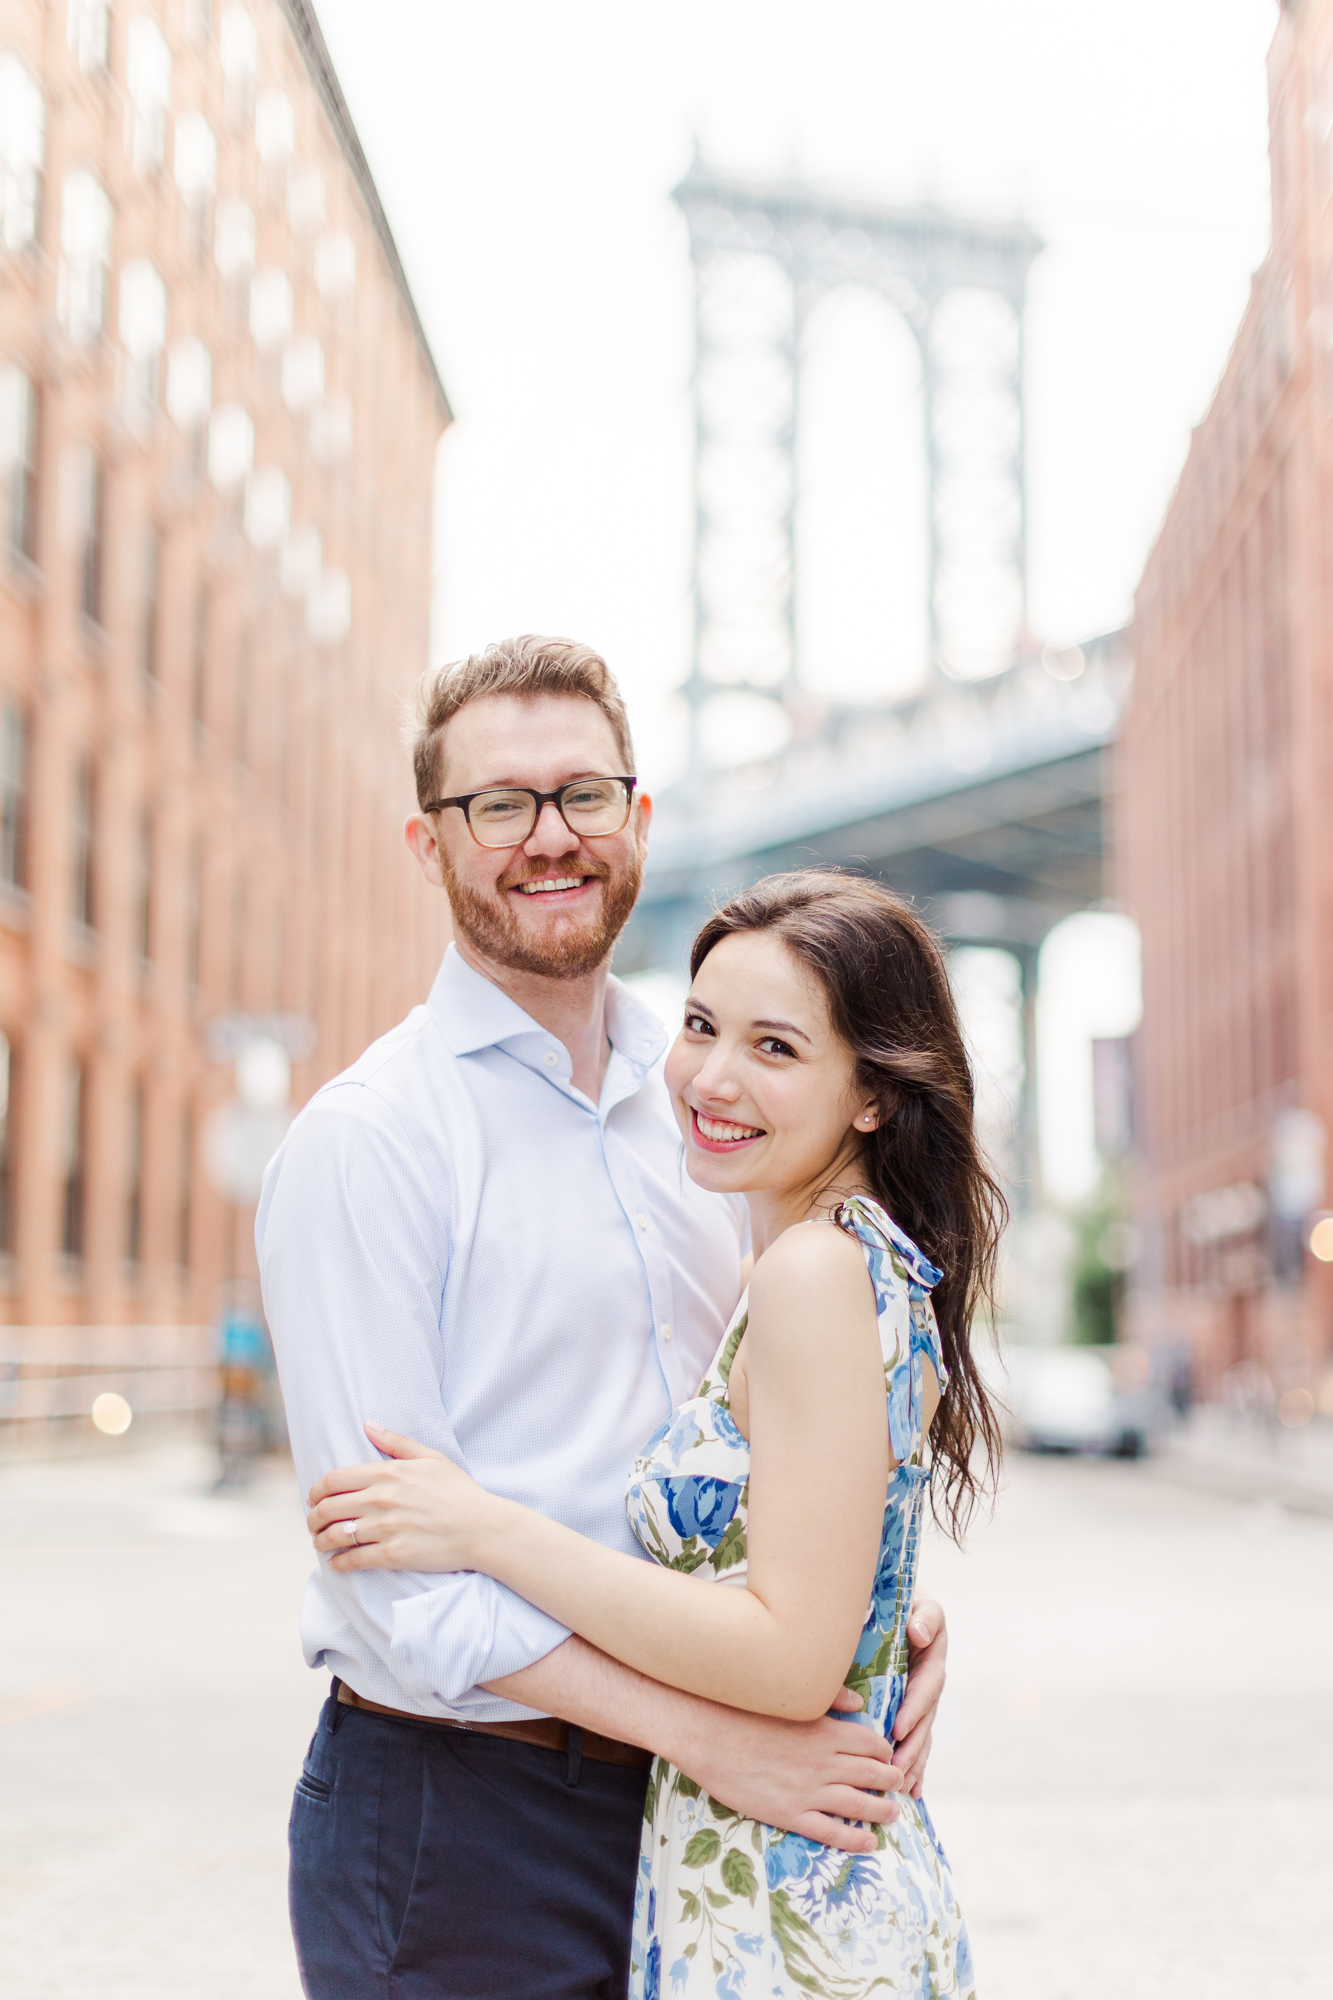 Dazzling Engagement Photos in Brooklyn Heights